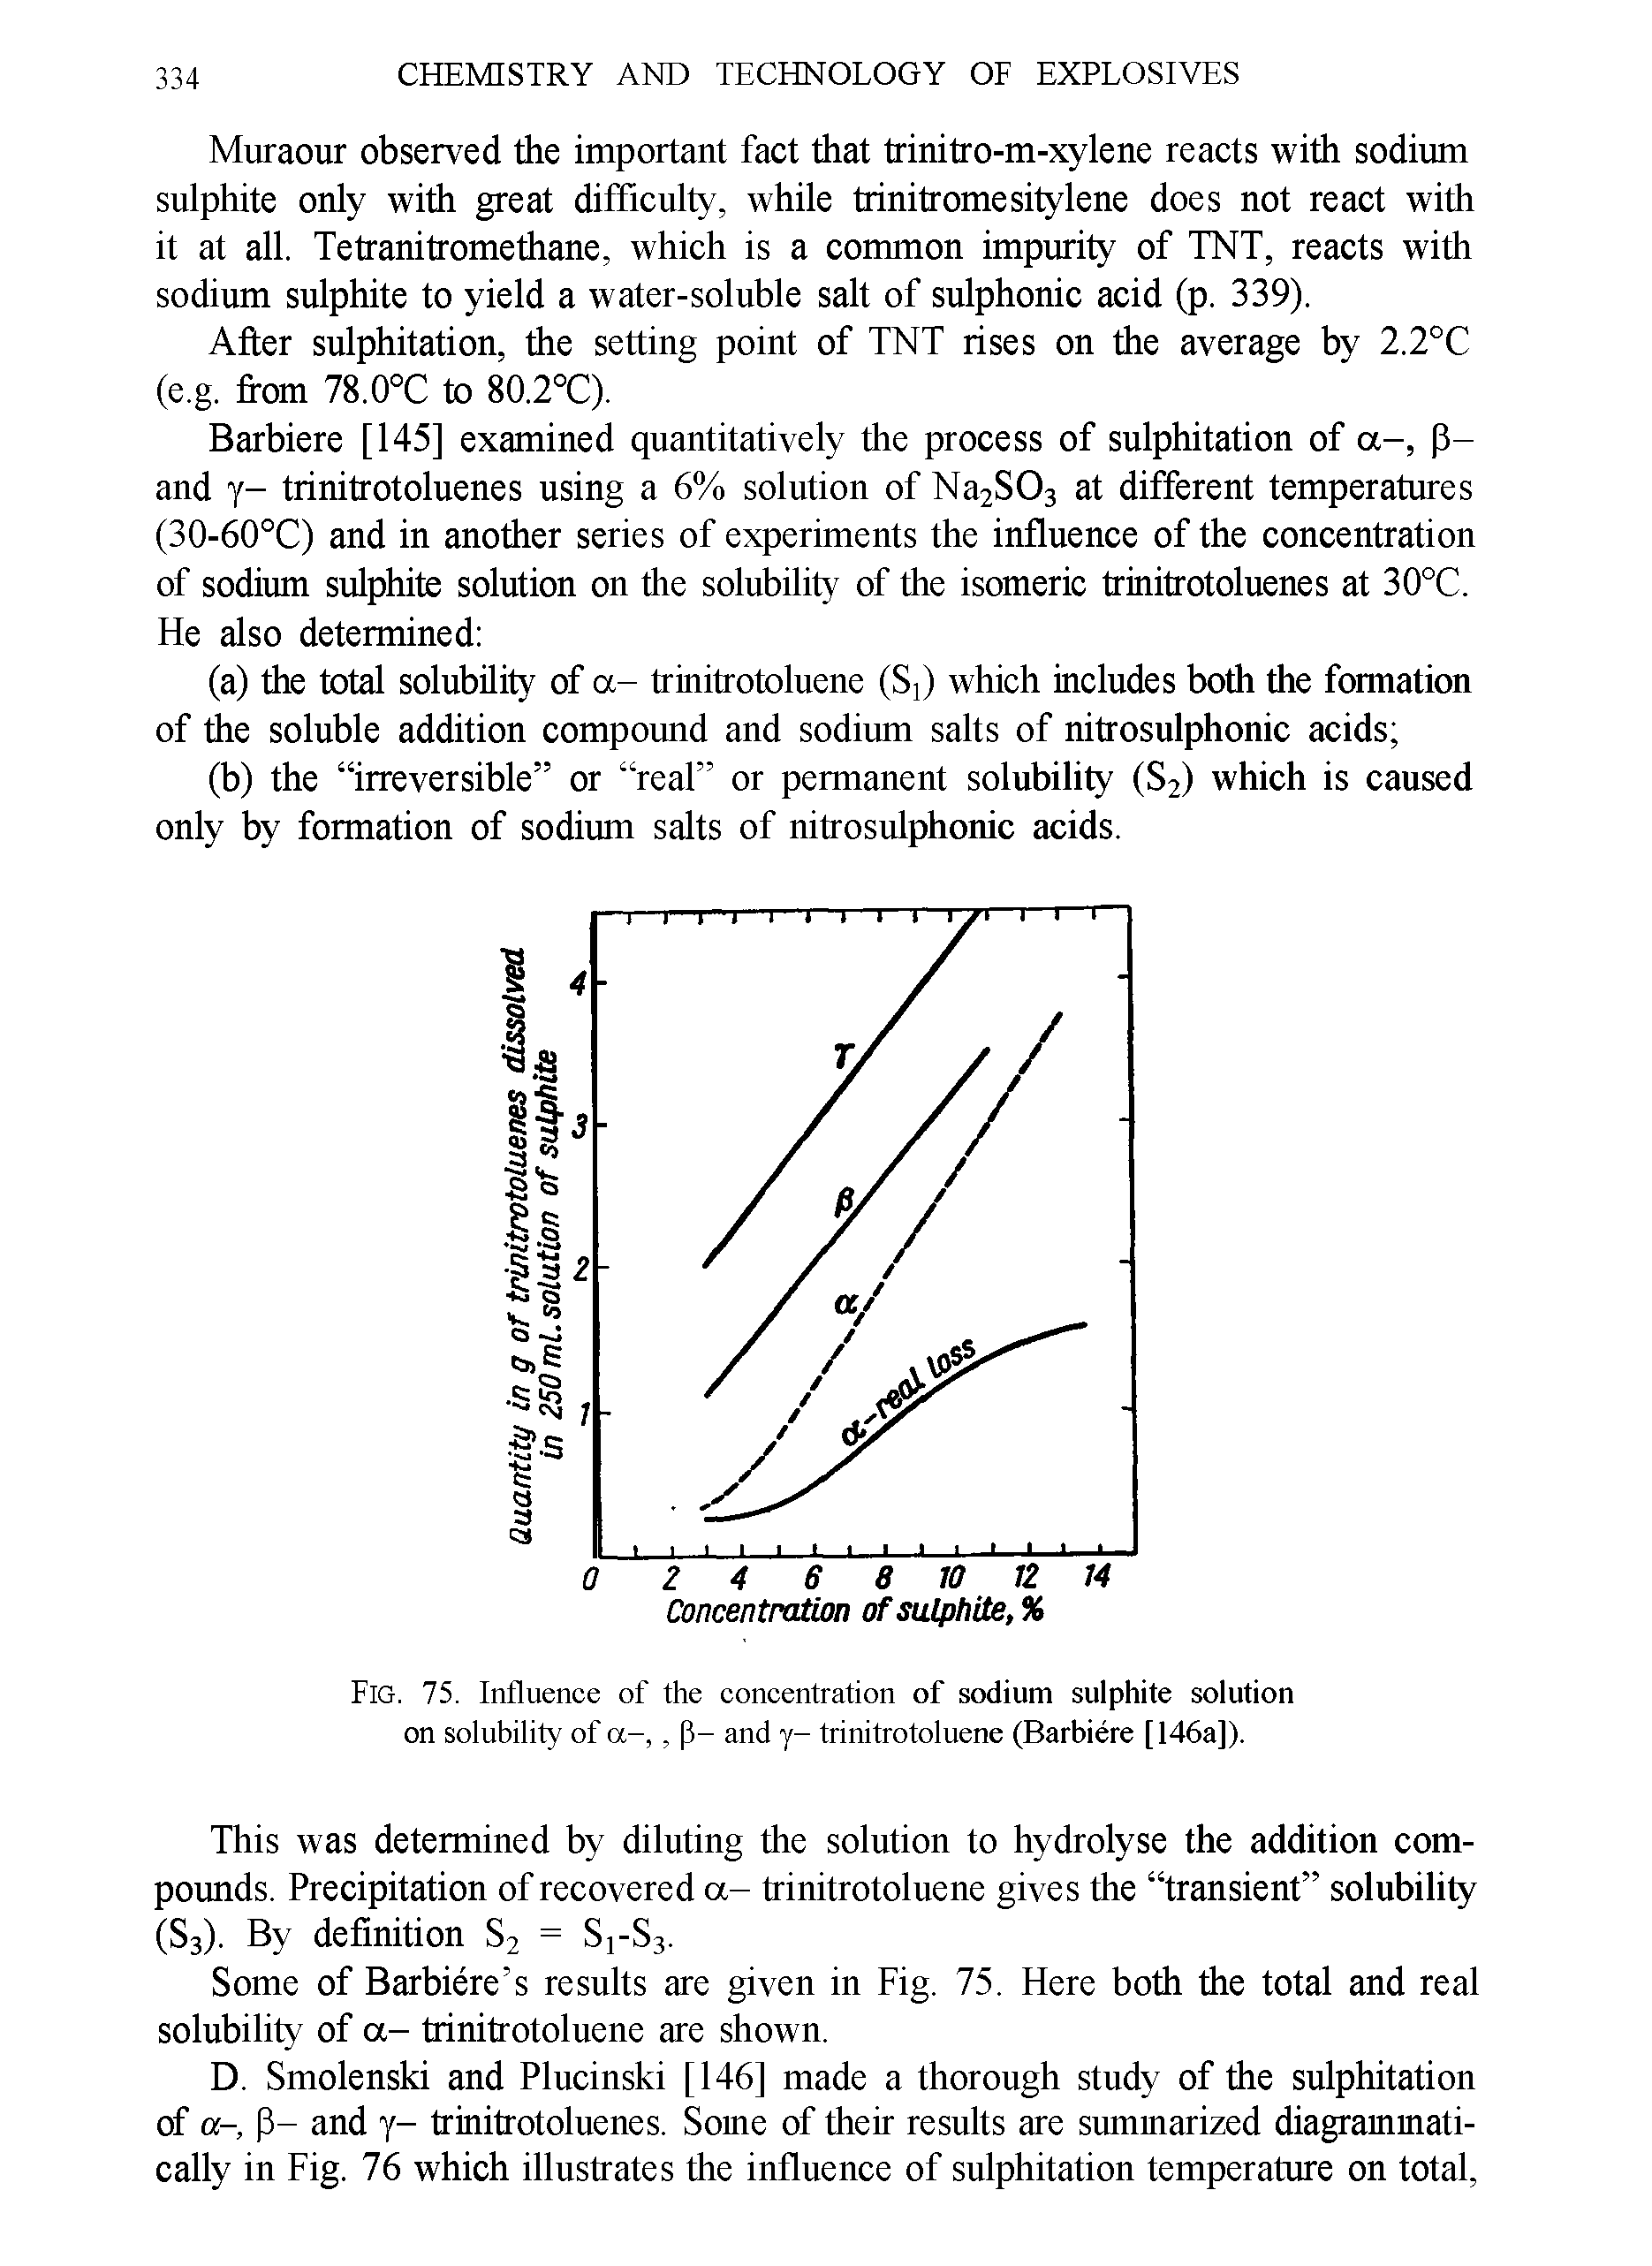 Fig. 75. Influence of the concentration of sodium sulphite solution on solubility of a-,, 3- and y- trinitrotoluene (Barbiere [146a]).